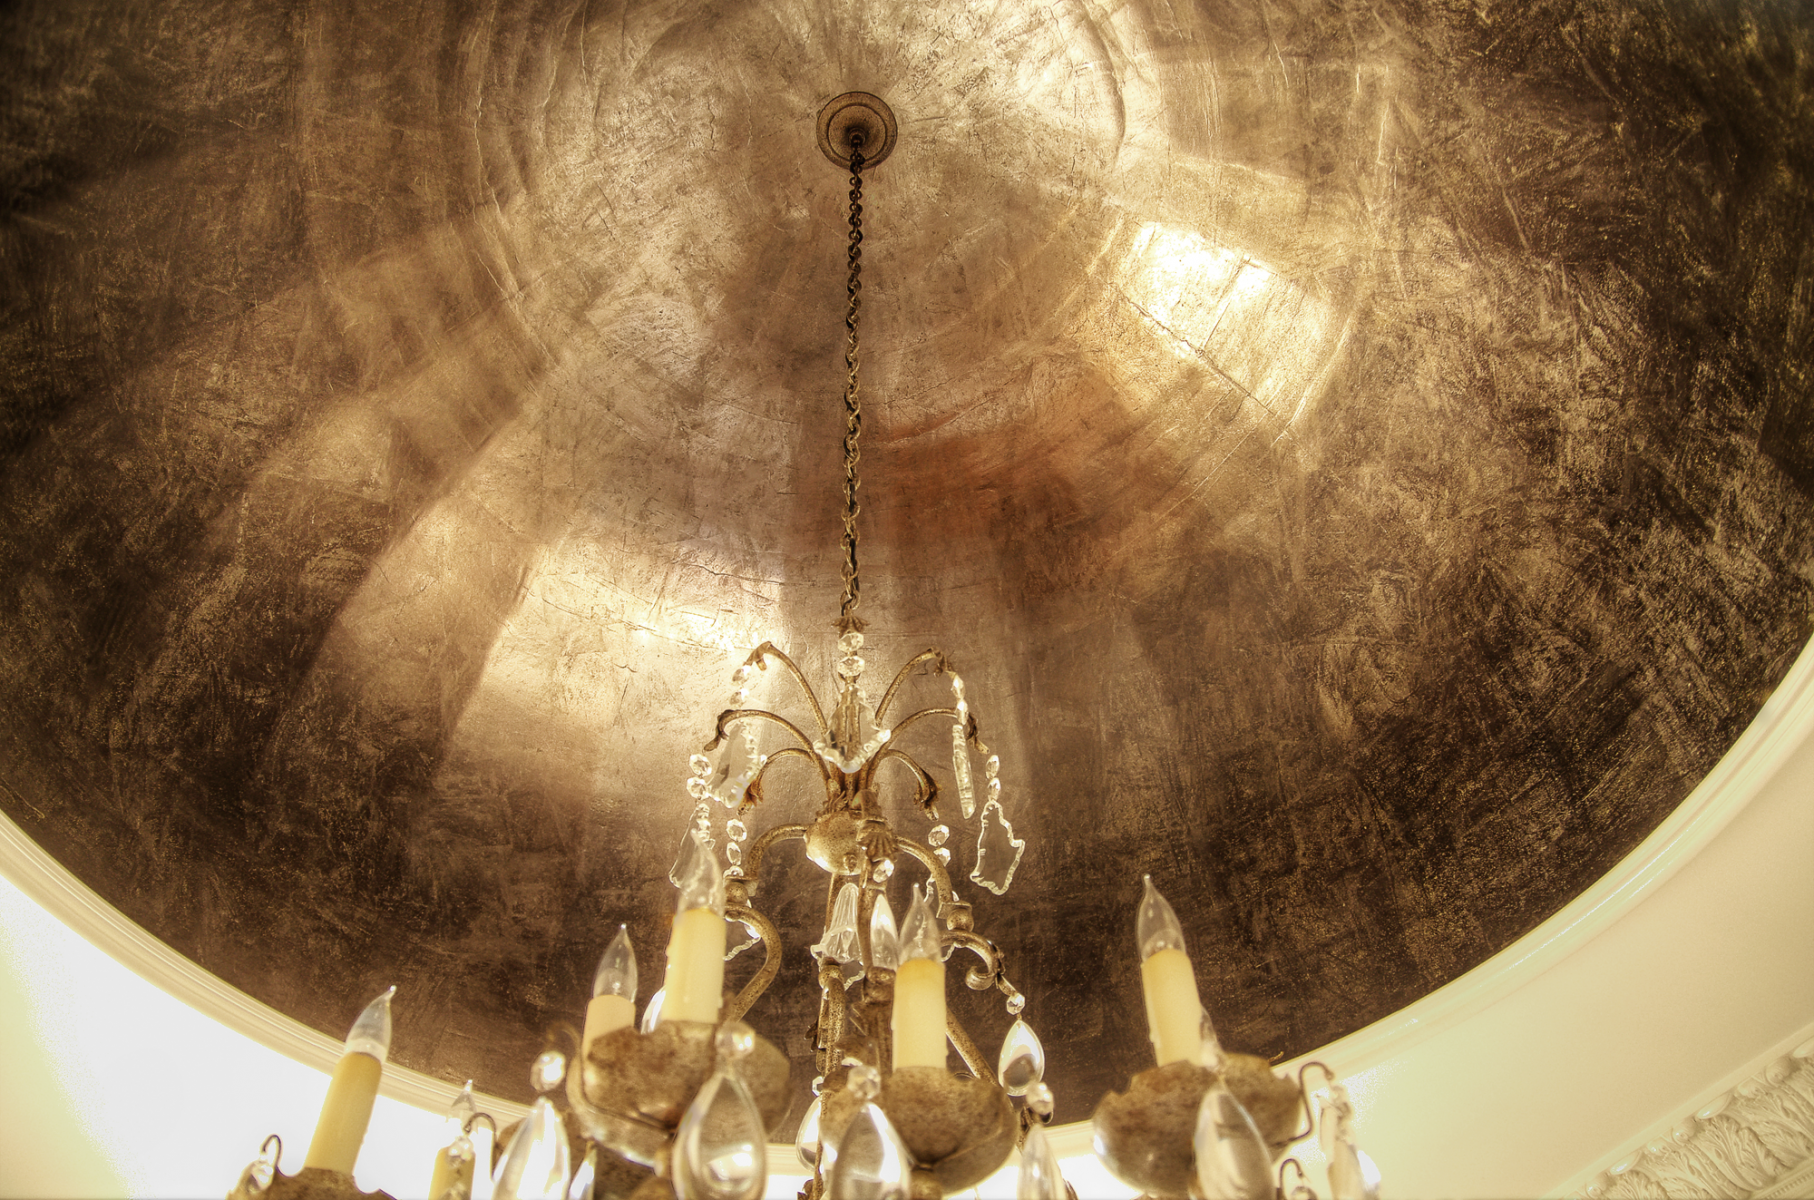 Silver and gold frottage dome ceiling design.